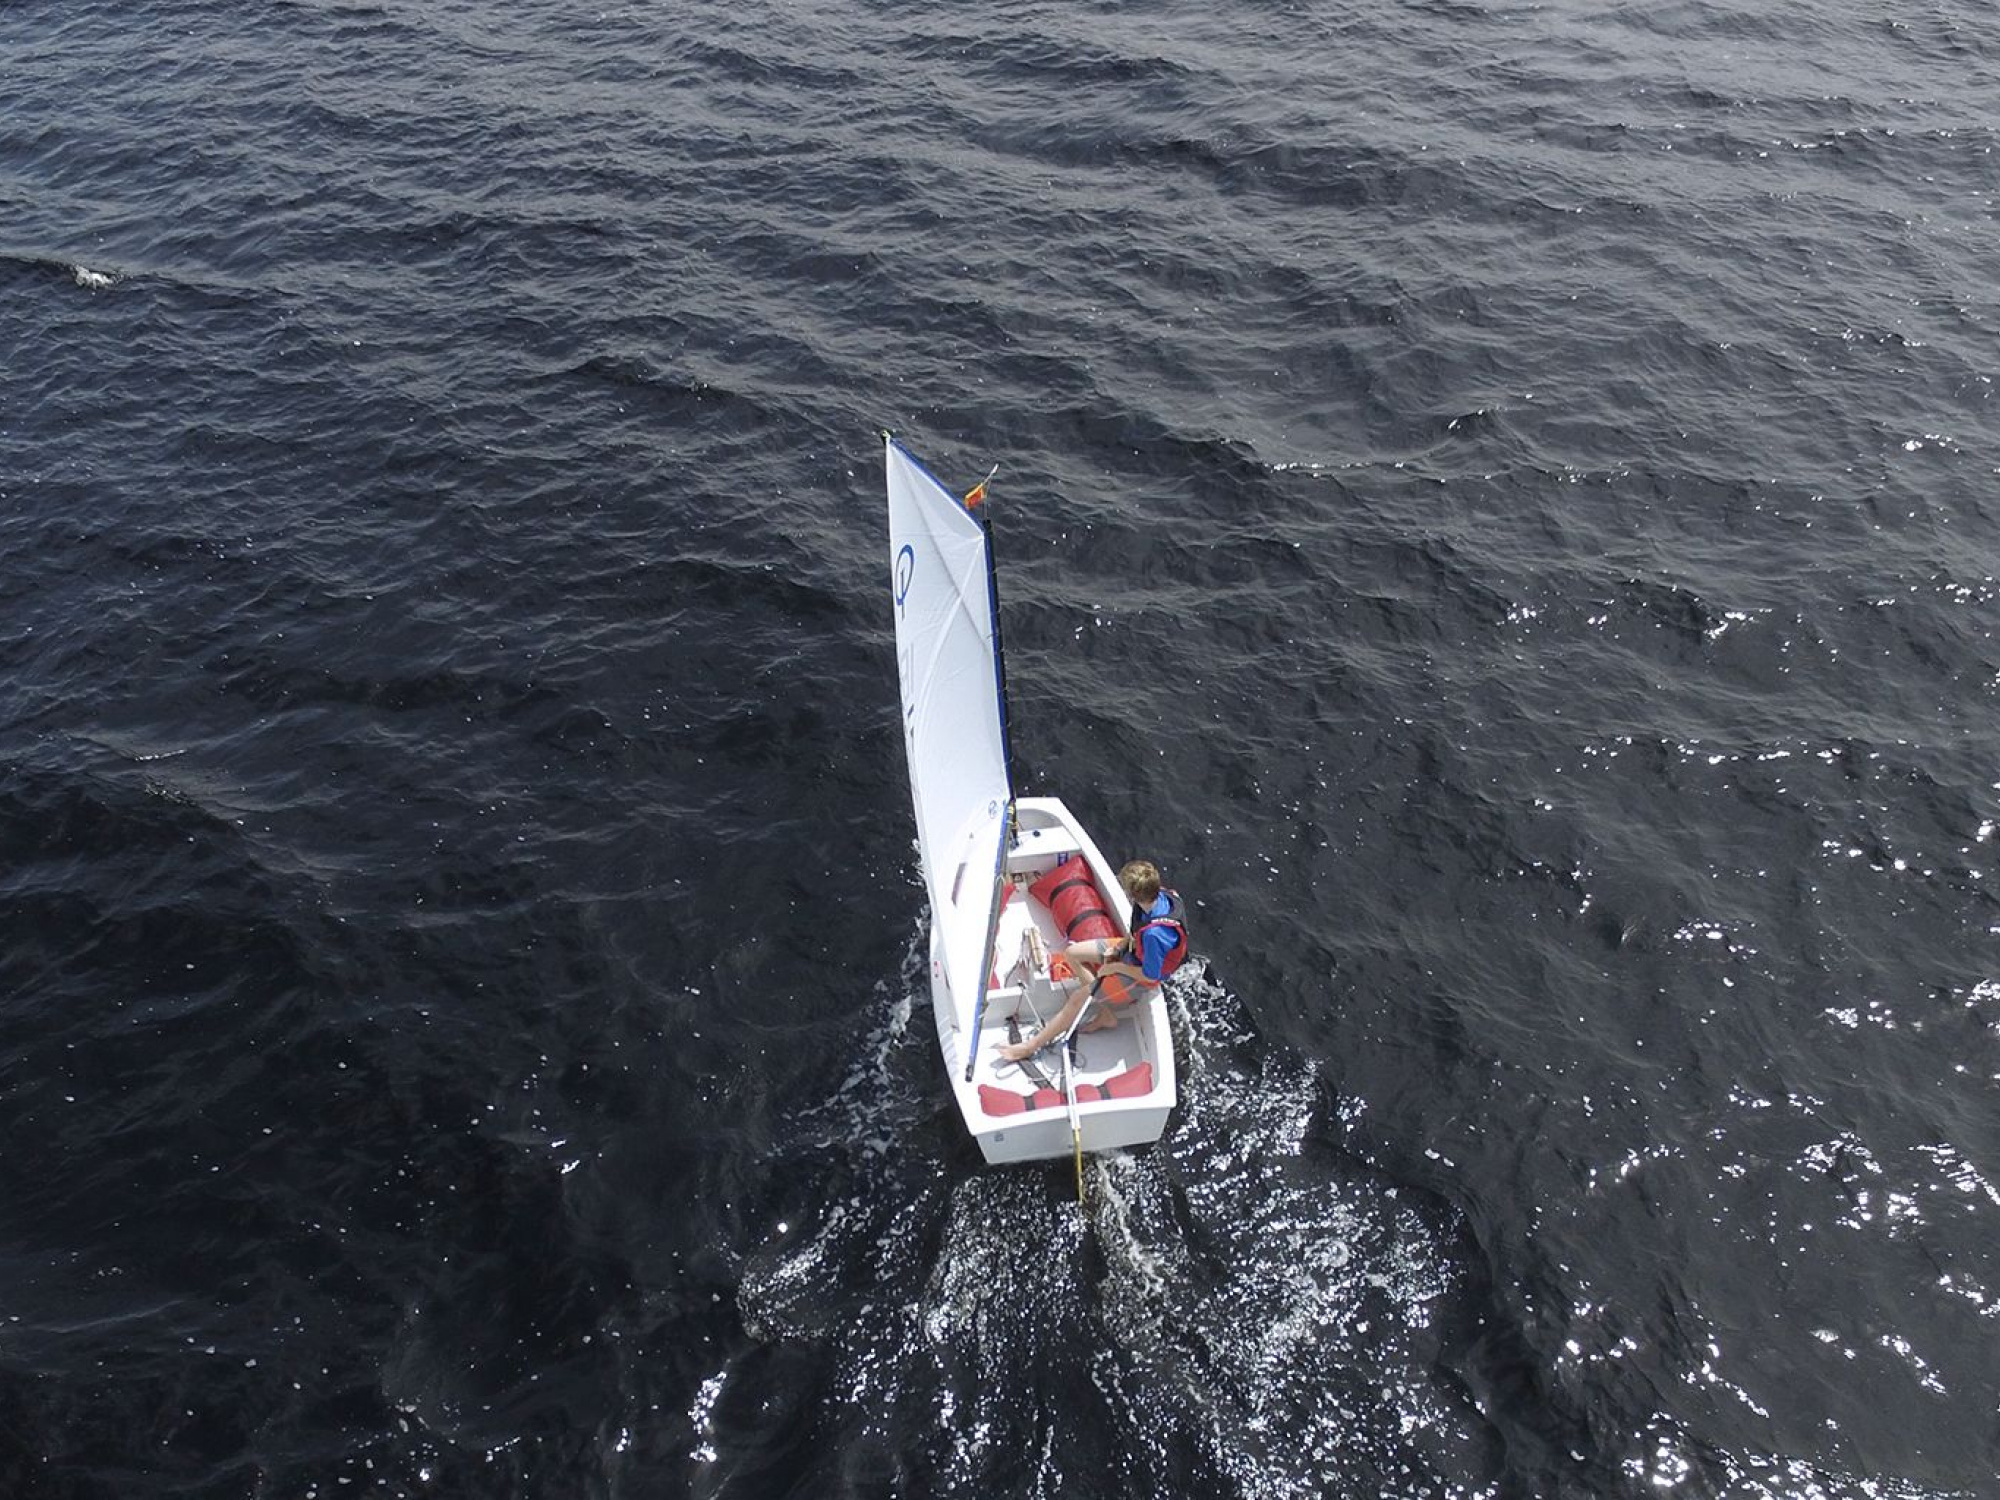 Aerial of young boy in Opti sailboat